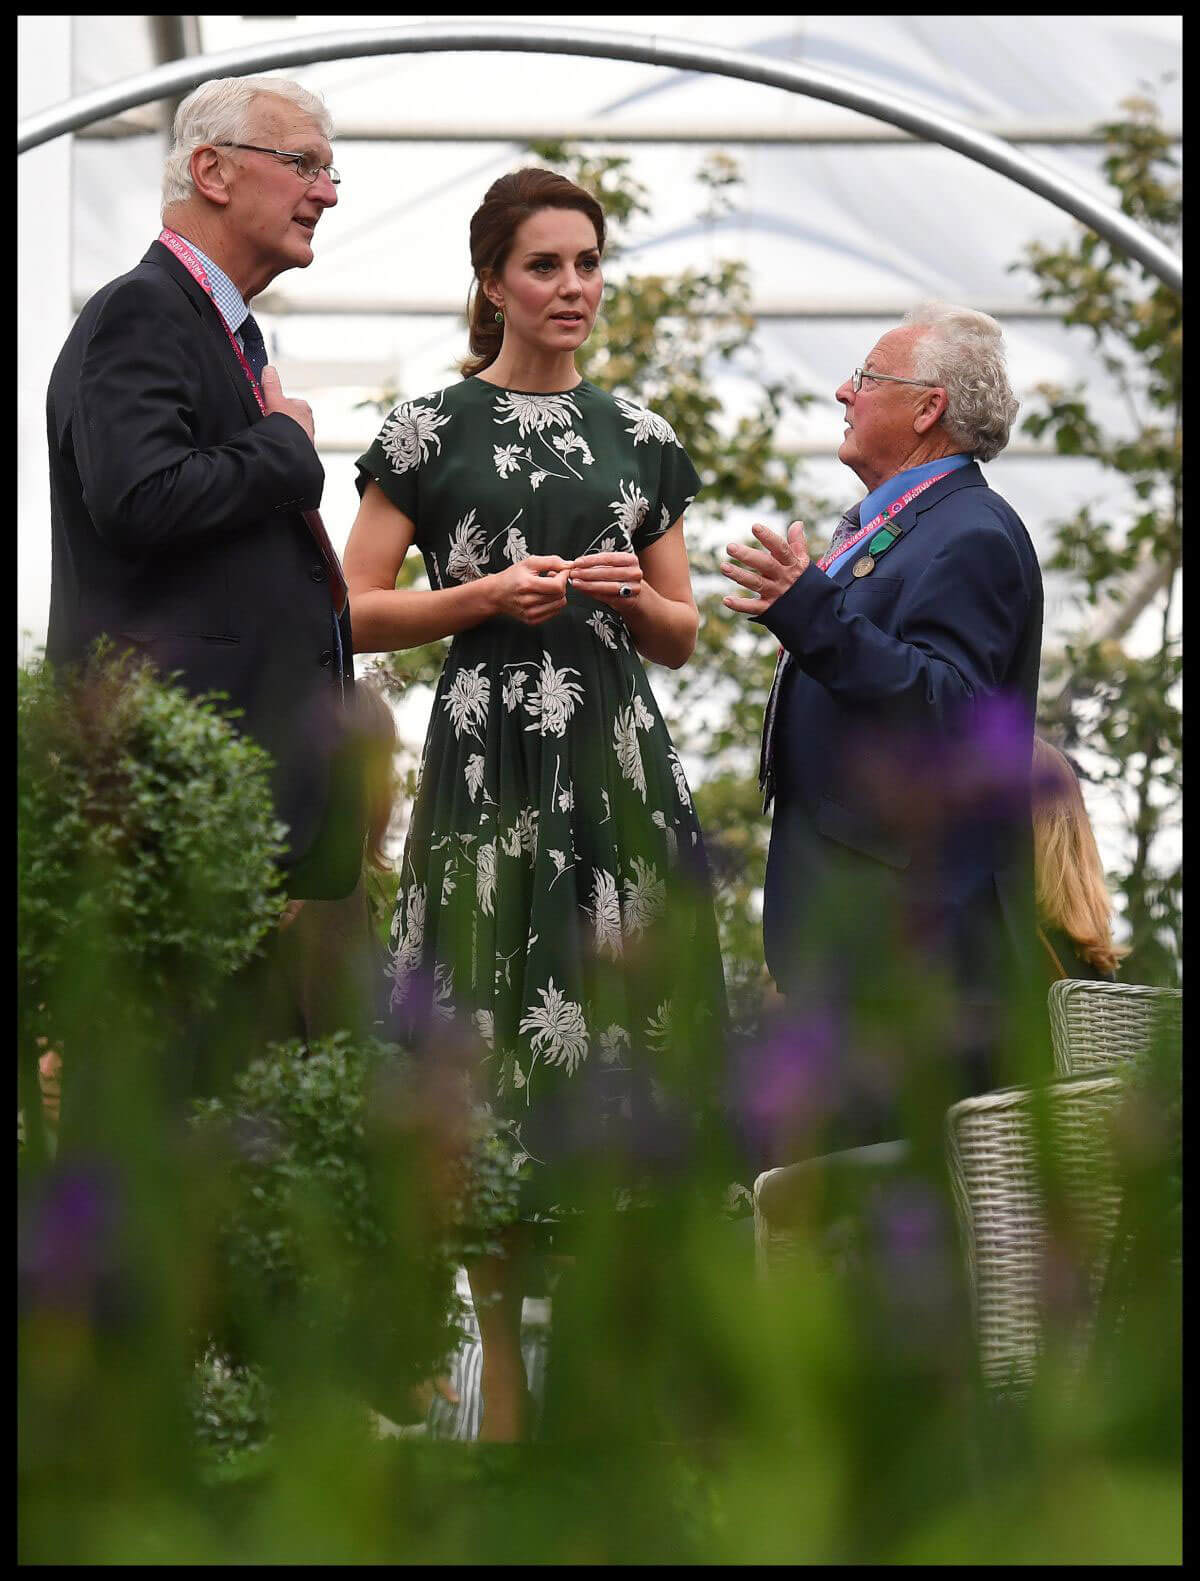 Kate Middleton at 2017 RHS Chelsea Flower Show in London